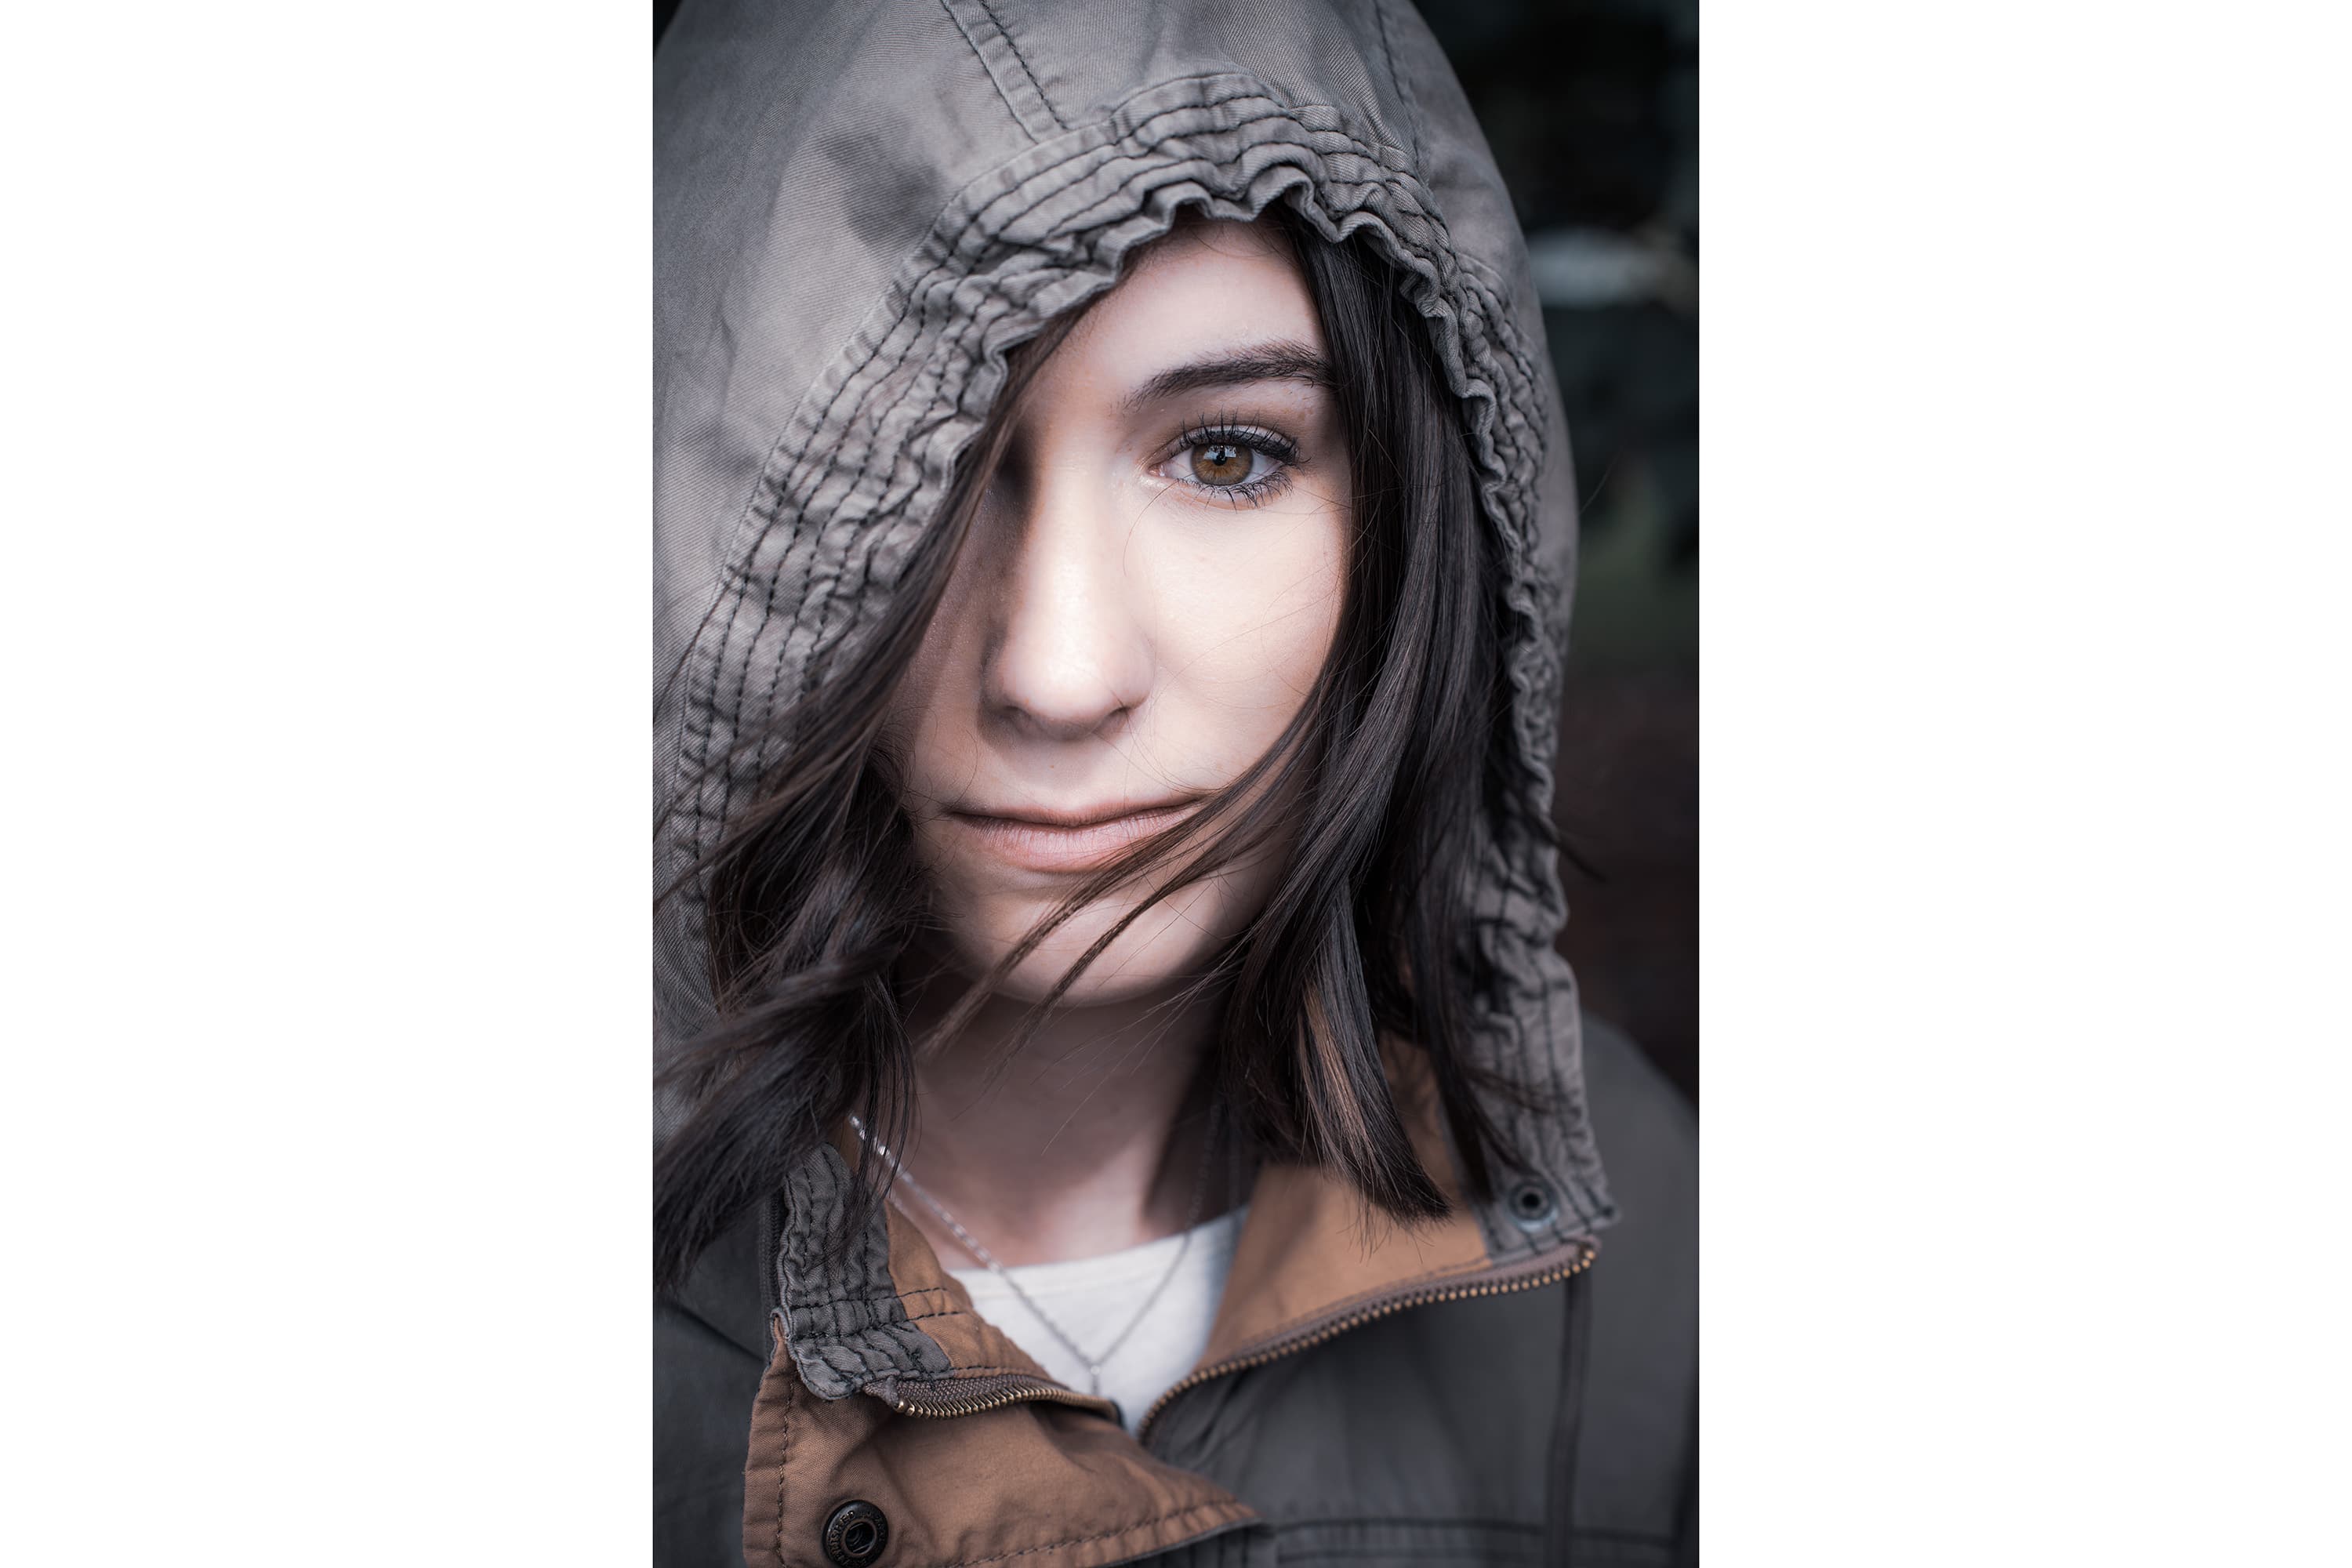 Portrait of a women wearing a hood covering part of her face